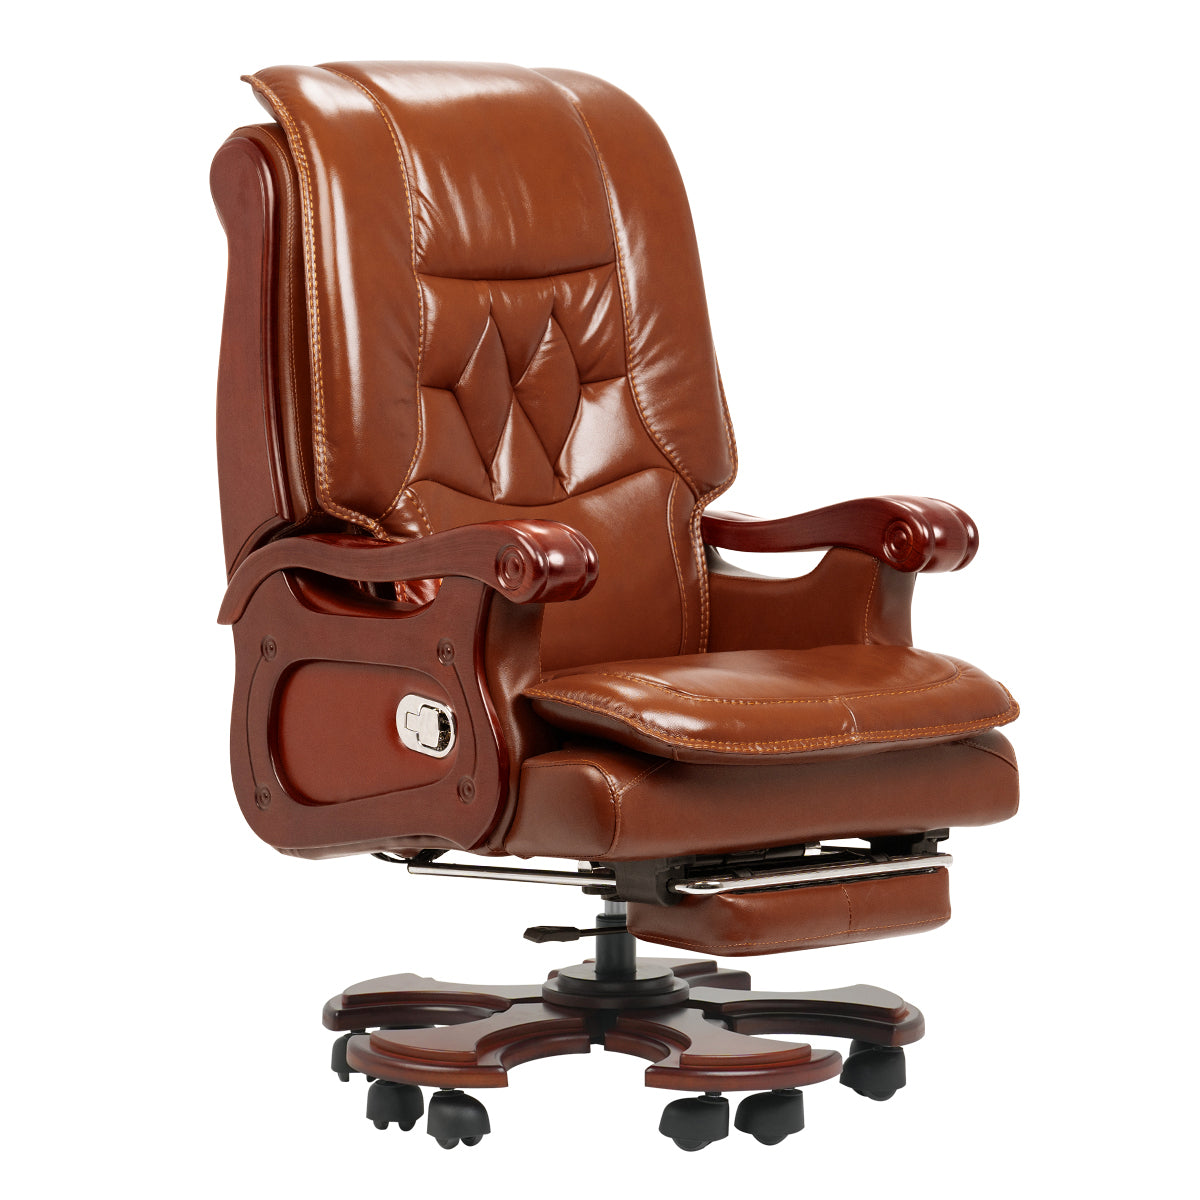 Mystical Office Chair - Enchanted Eames Low Back Seat - Luxe Furnishes